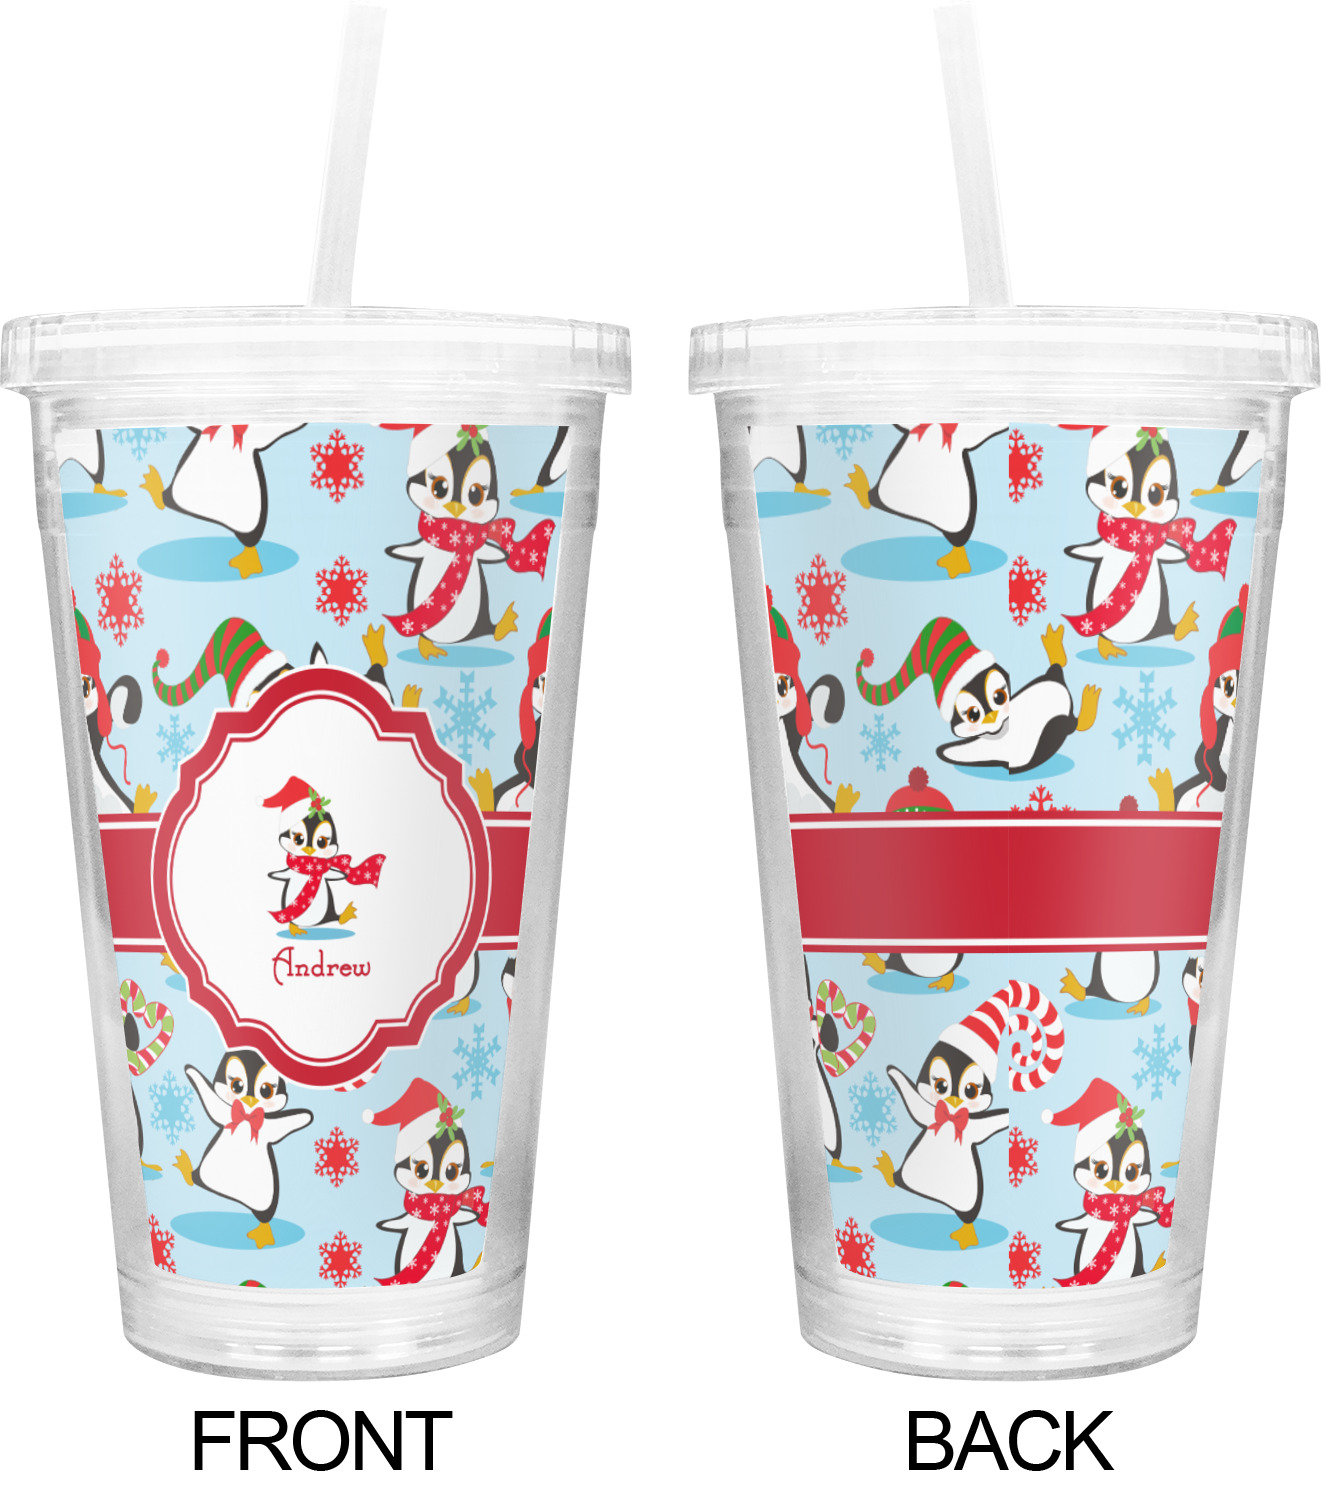 https://www.youcustomizeit.com/common/MAKE/204298/Christmas-Penguins-Double-Wall-Tumbler-with-Straw-Approval.jpg?lm=1671190291